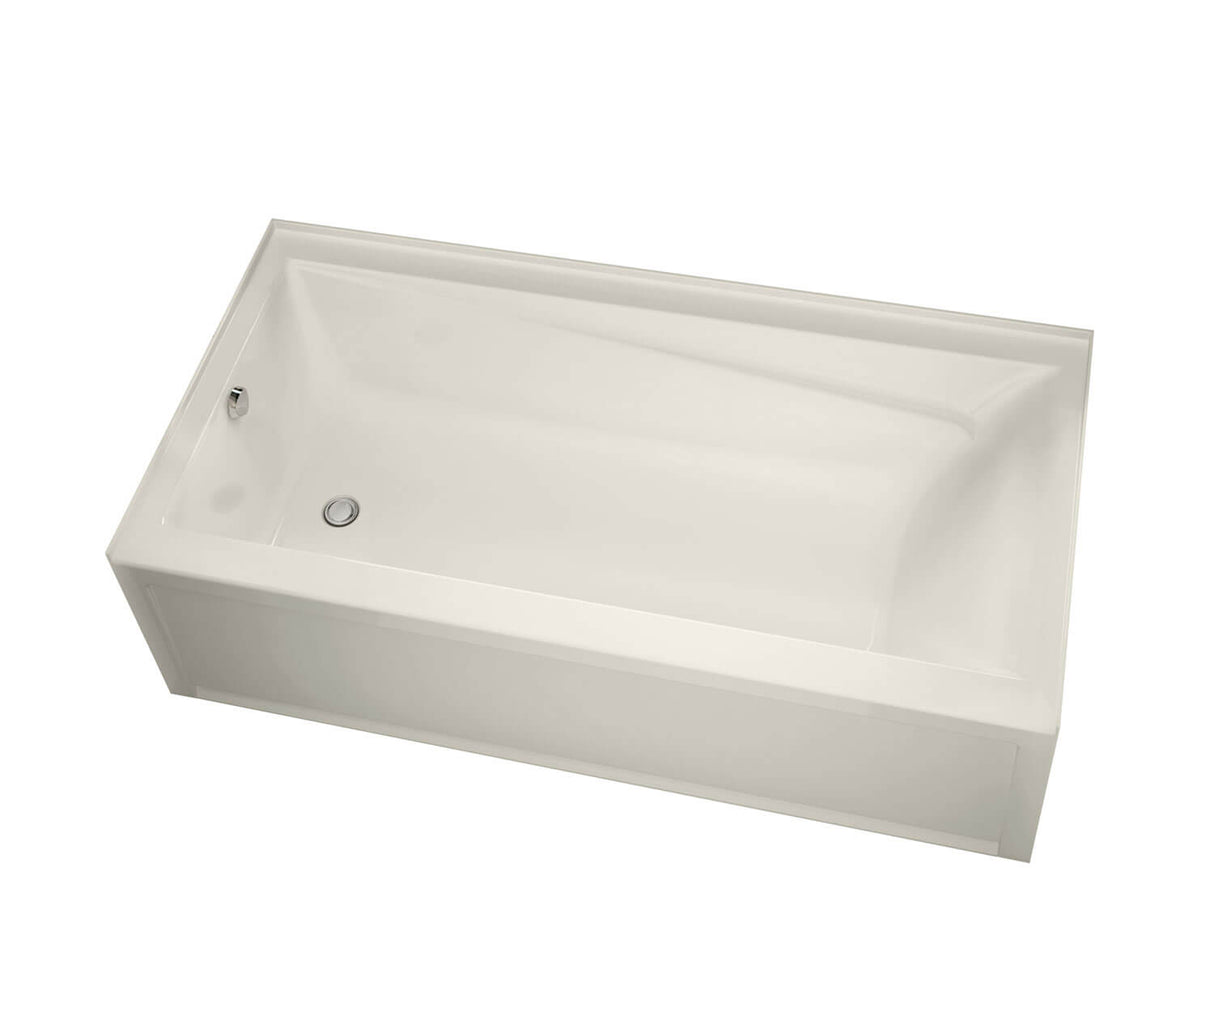 MAAX 106226-L-003-007 Exhibit 7232 IFS AFR Acrylic Alcove Left-Hand Drain Whirlpool Bathtub in Biscuit